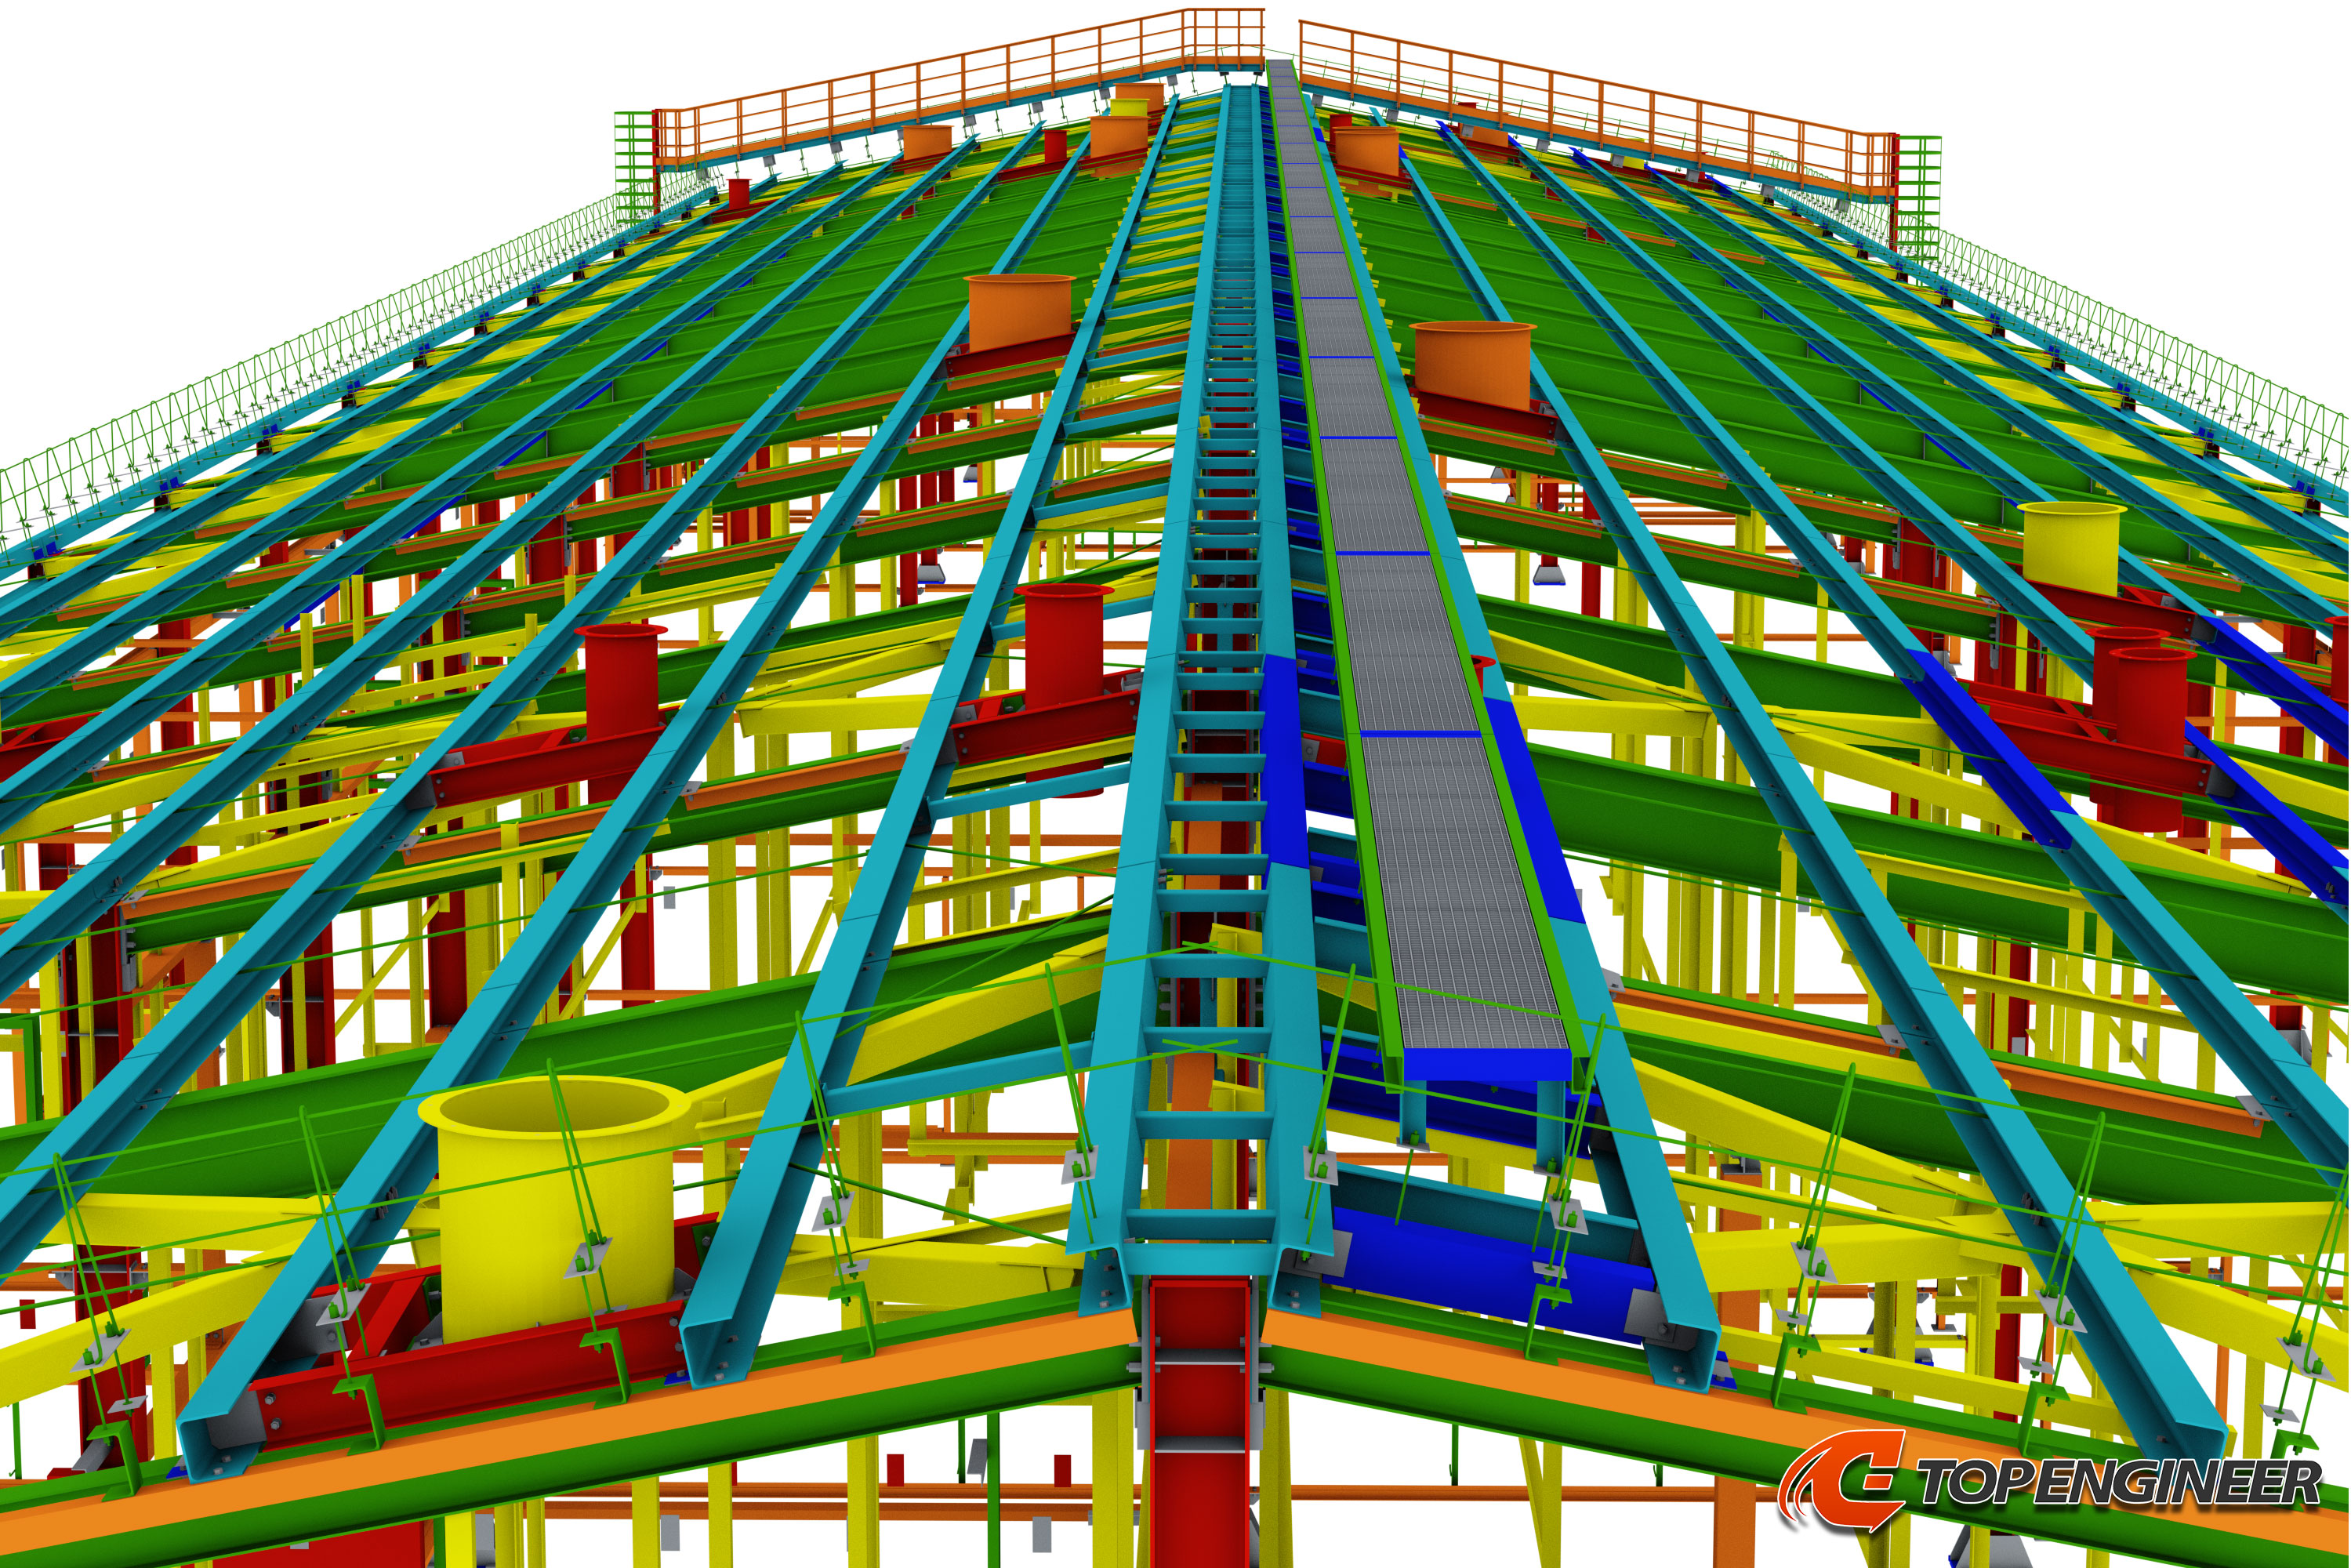 Steel fabrication detailing in Tekla Structures